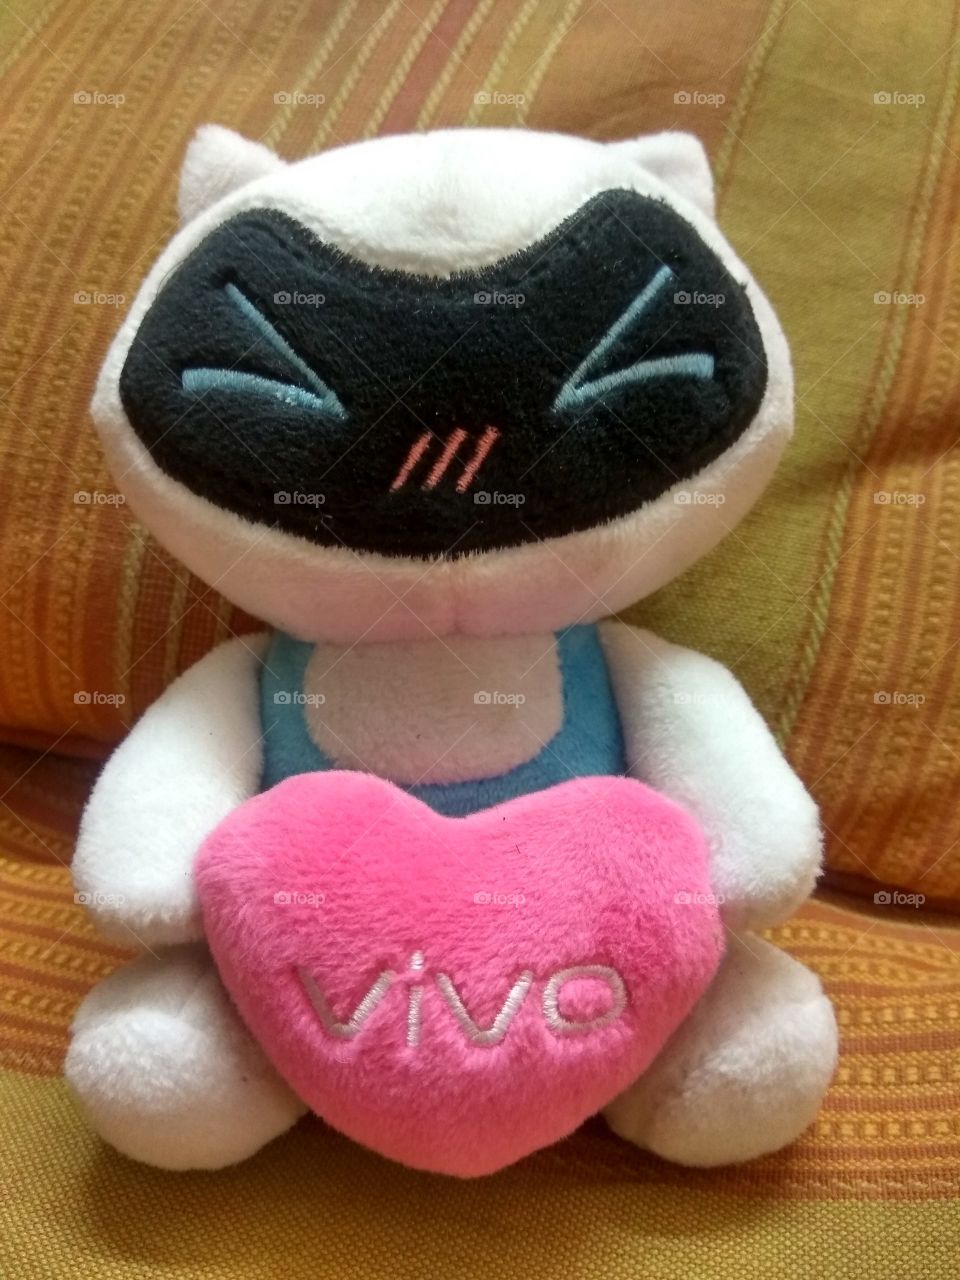 the toy of vivo mobile phone